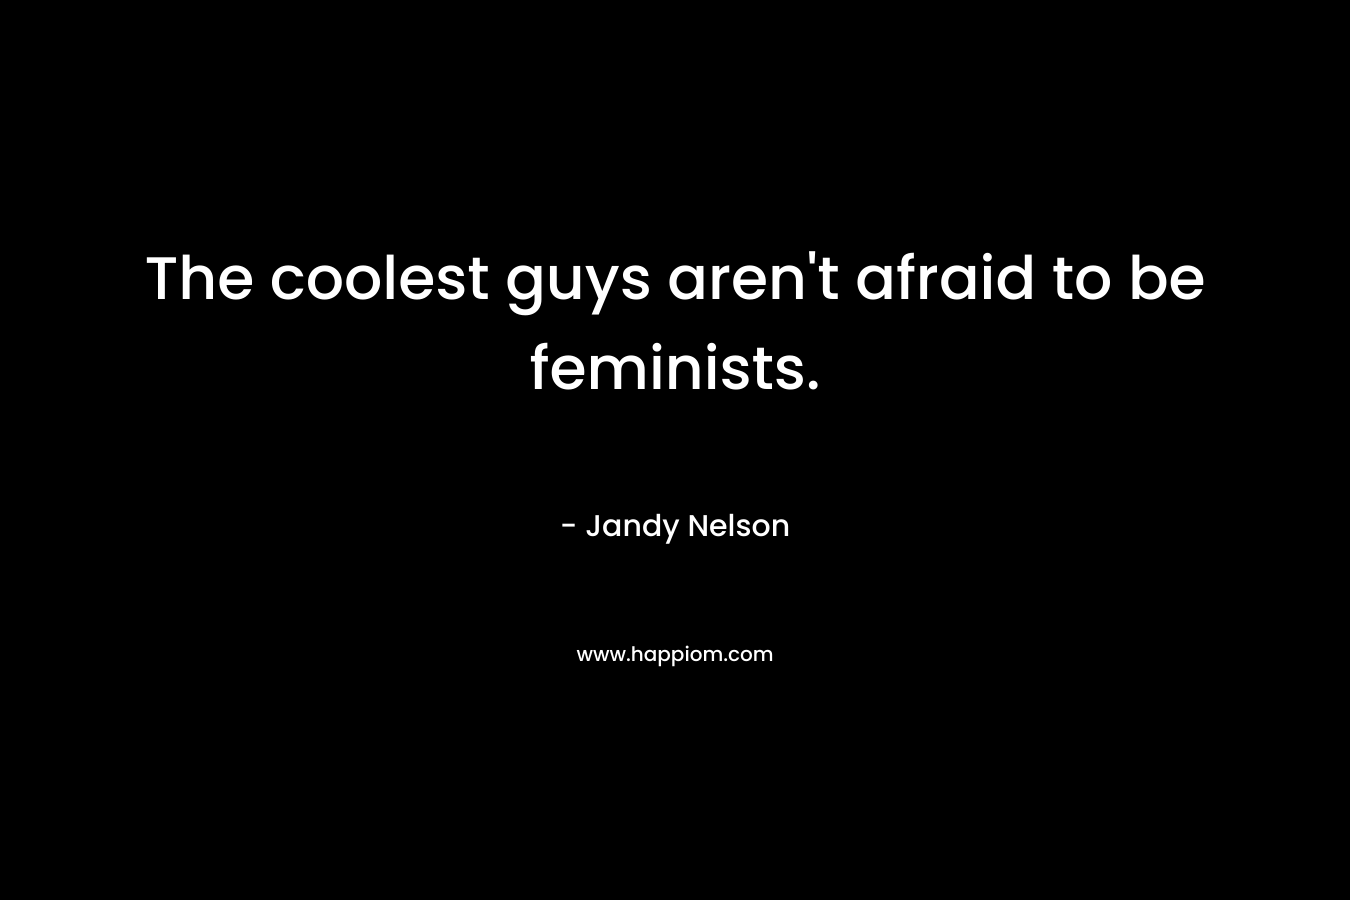 The coolest guys aren’t afraid to be feminists. – Jandy Nelson